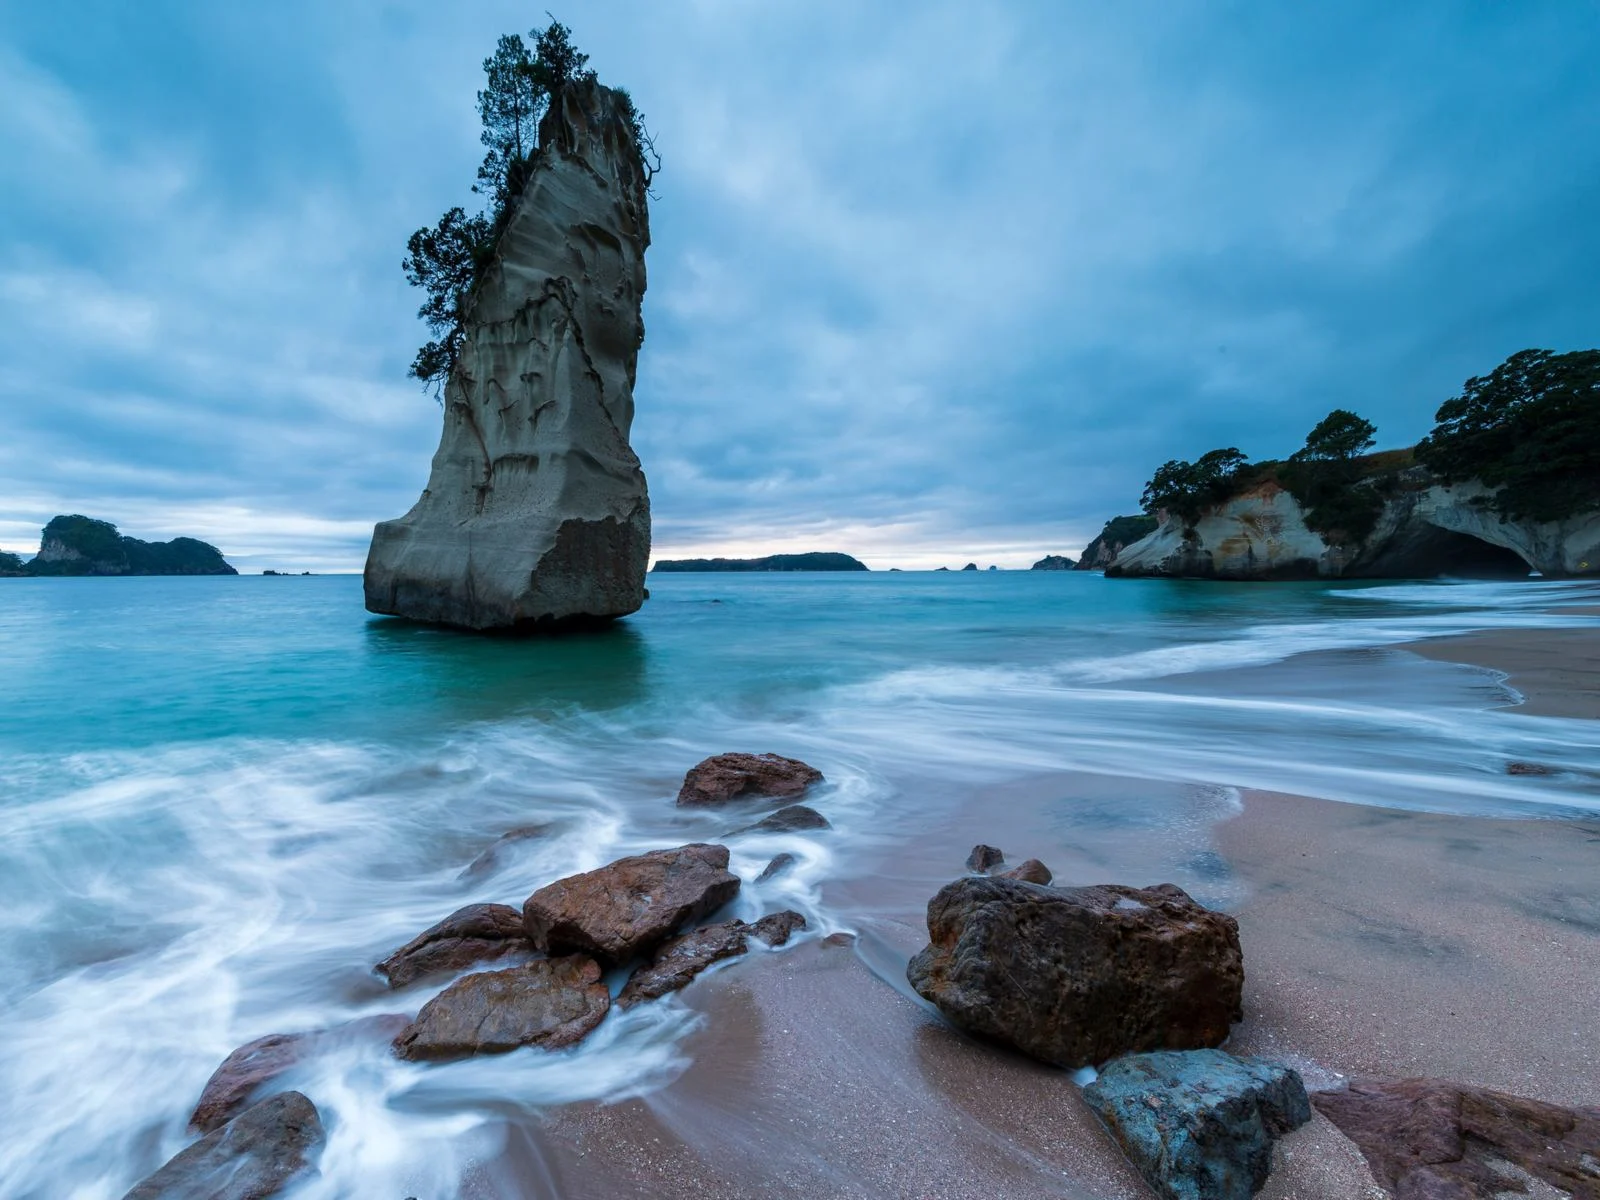 Te Whanganui, one of the best island vacations, pictured with a rock formation as seen from the coast